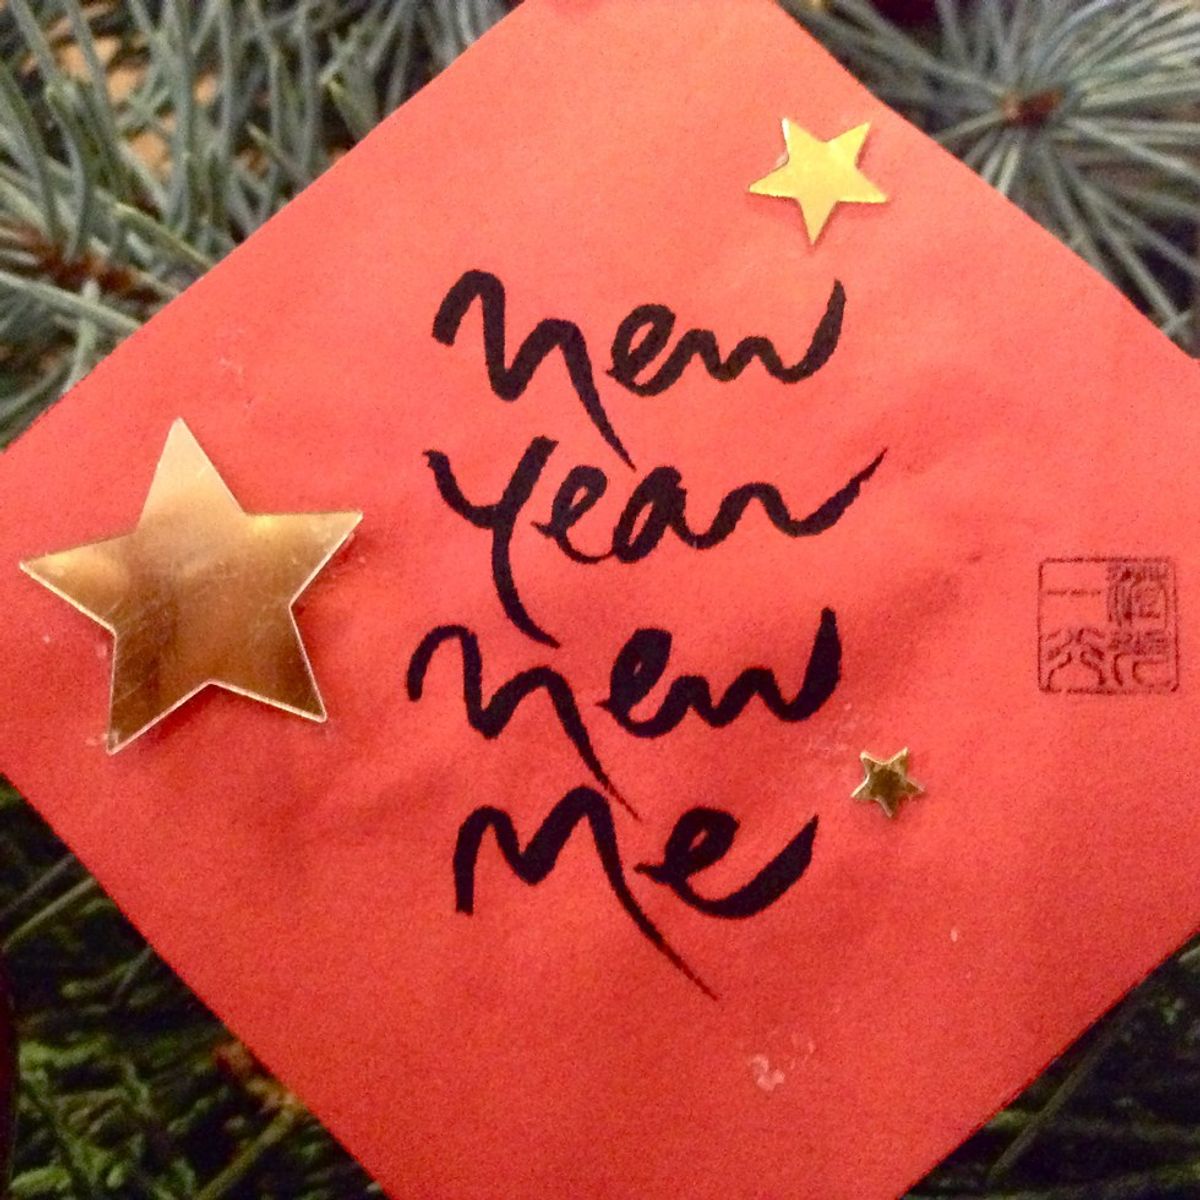 4 Reason Why "New Year, New Me" Is Nonsense